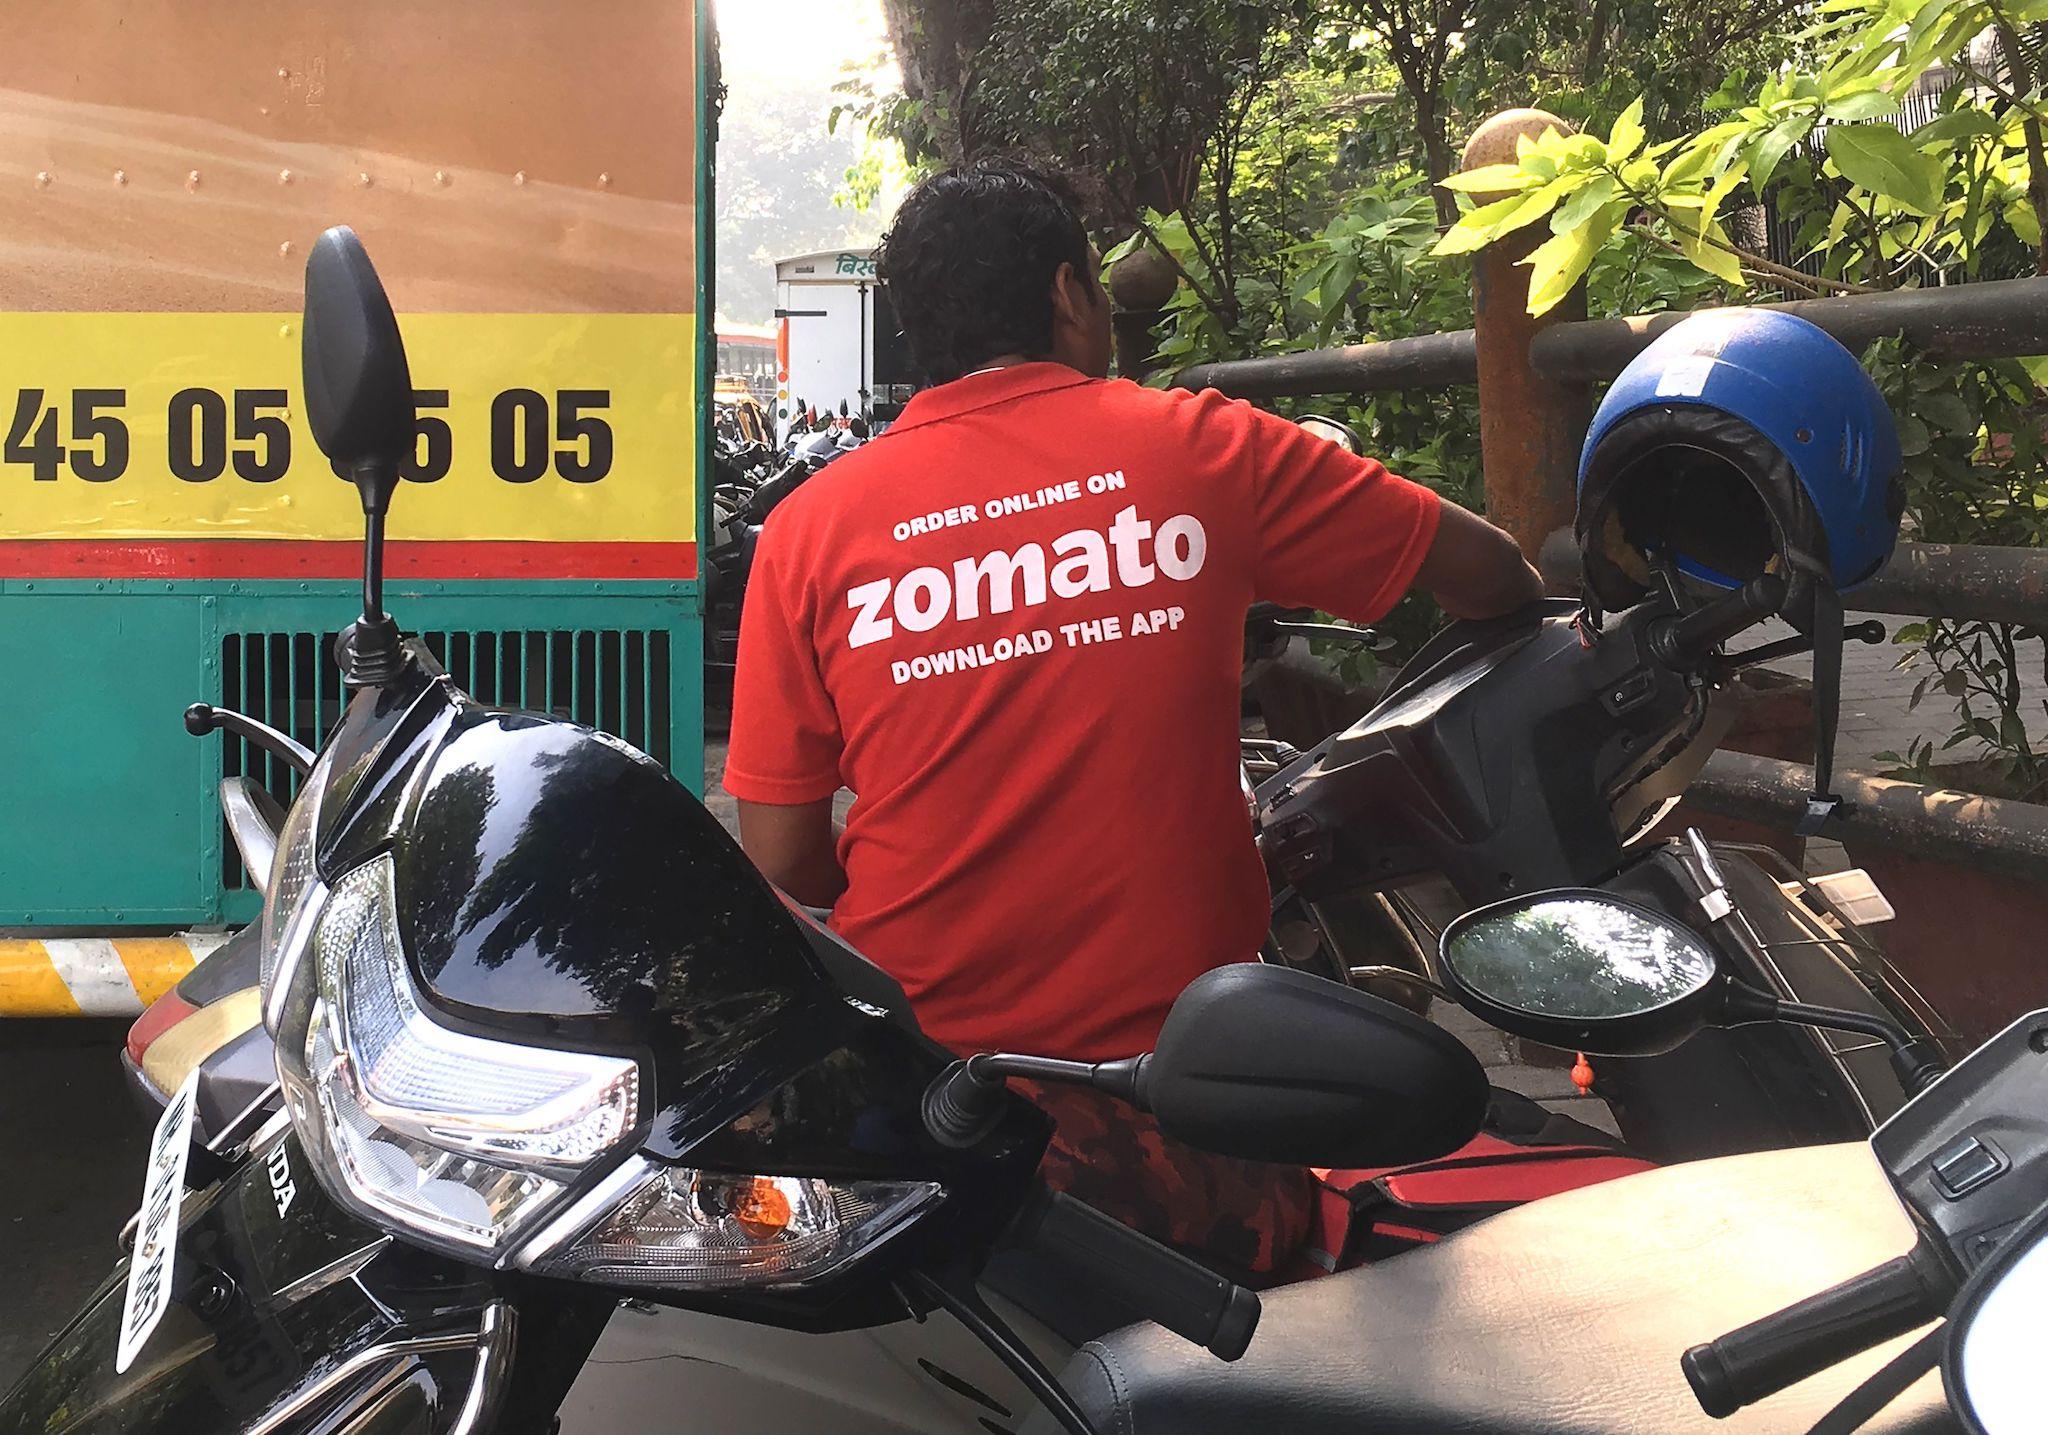 Food-ordering apps like Uber Eats, Swiggy and Zomato have surged in popularity in India